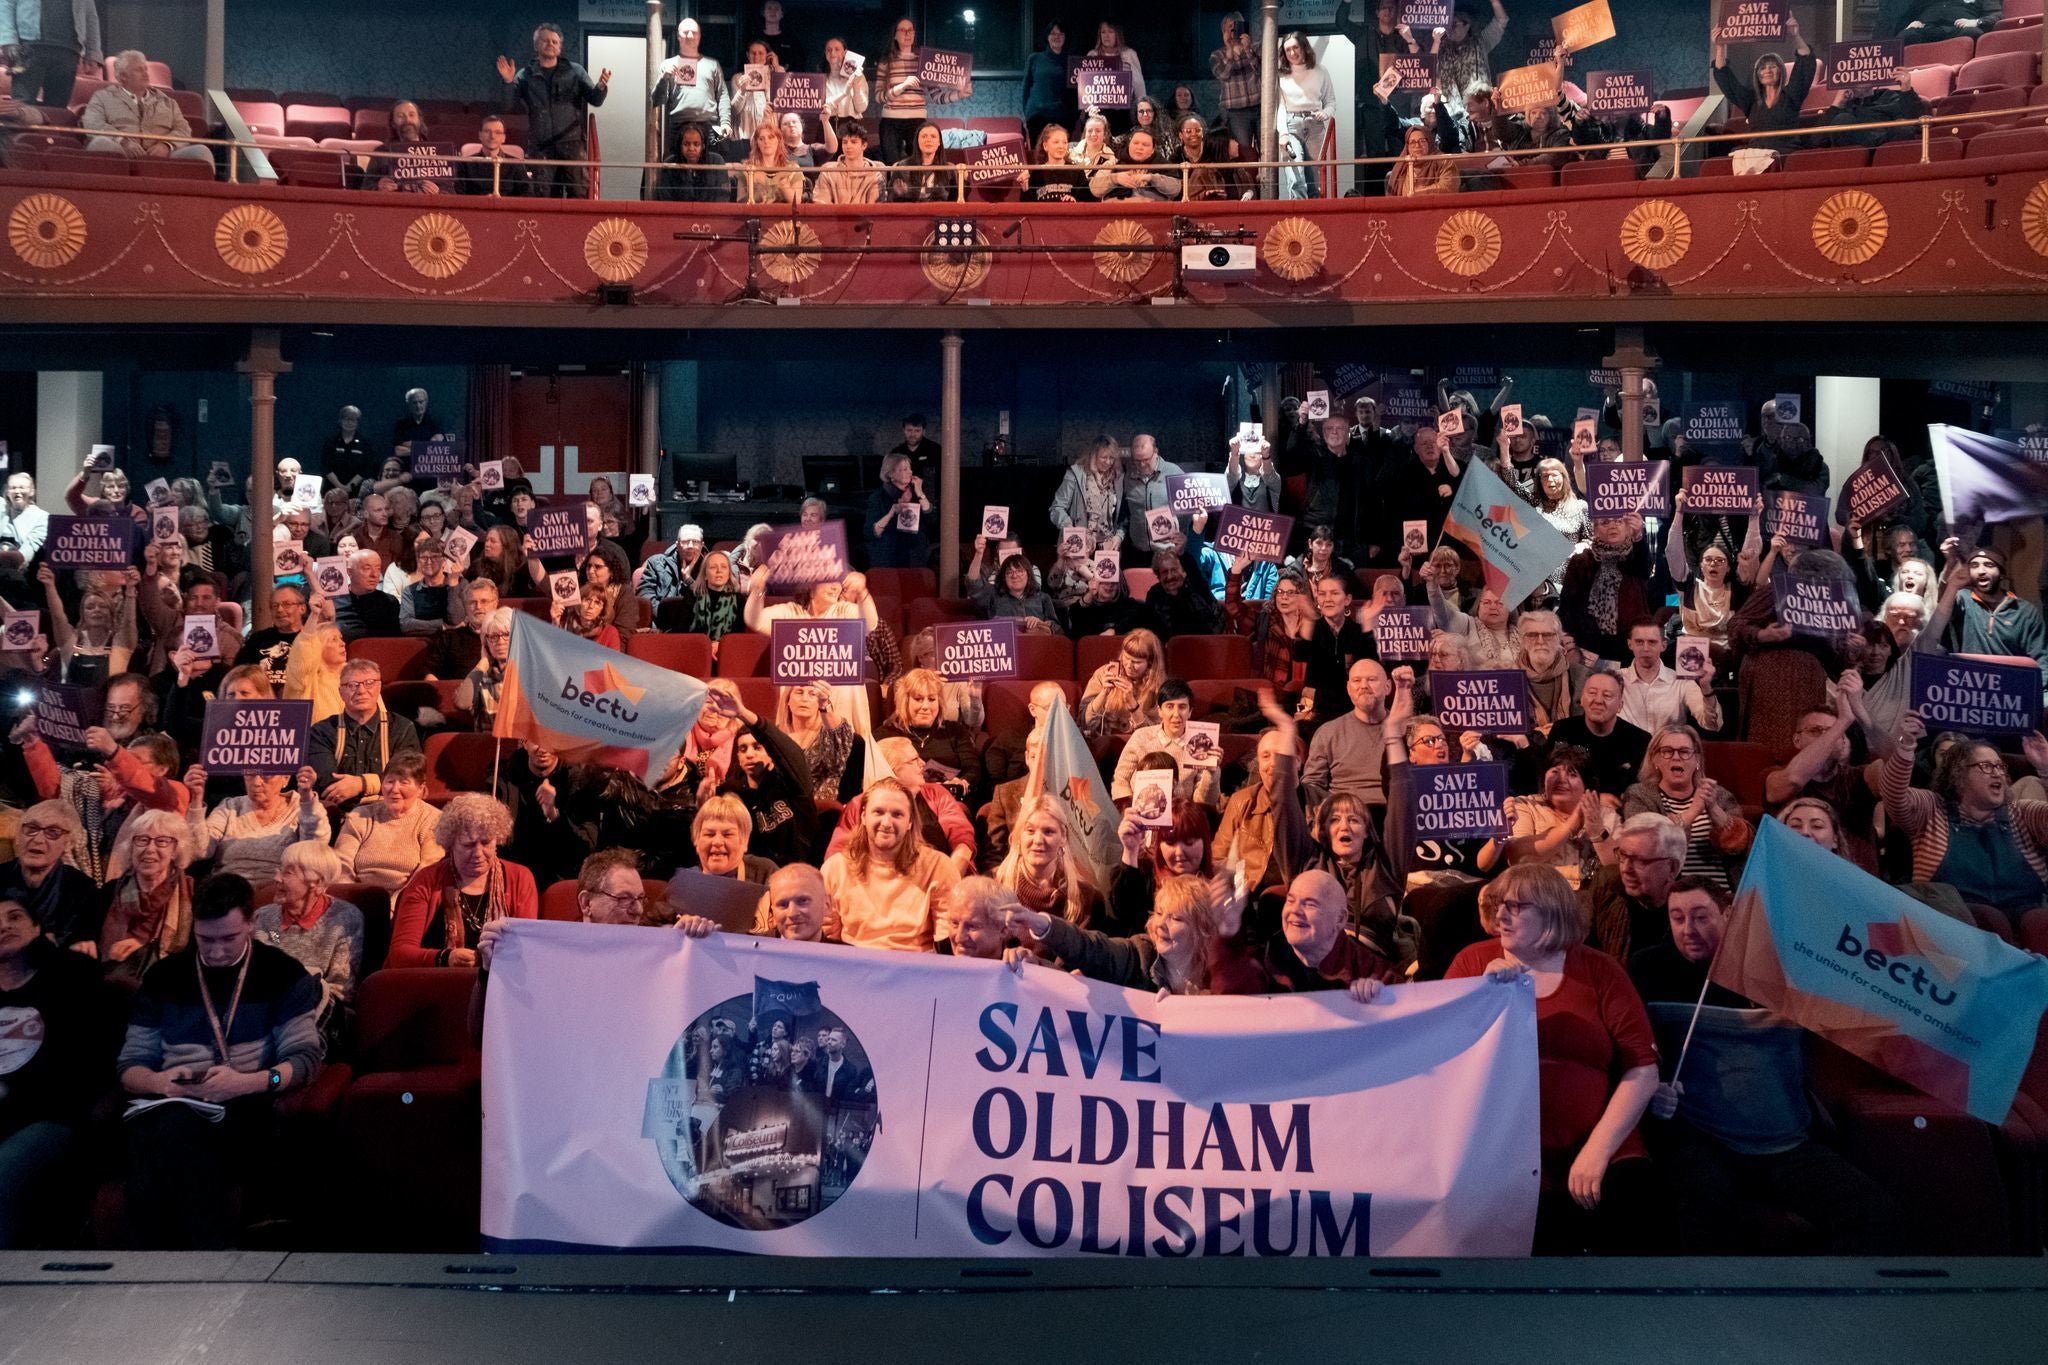 Members of the audience at a public meeting to save the historic Oldham Coliseum in Greater Manchester (Equity/PA)